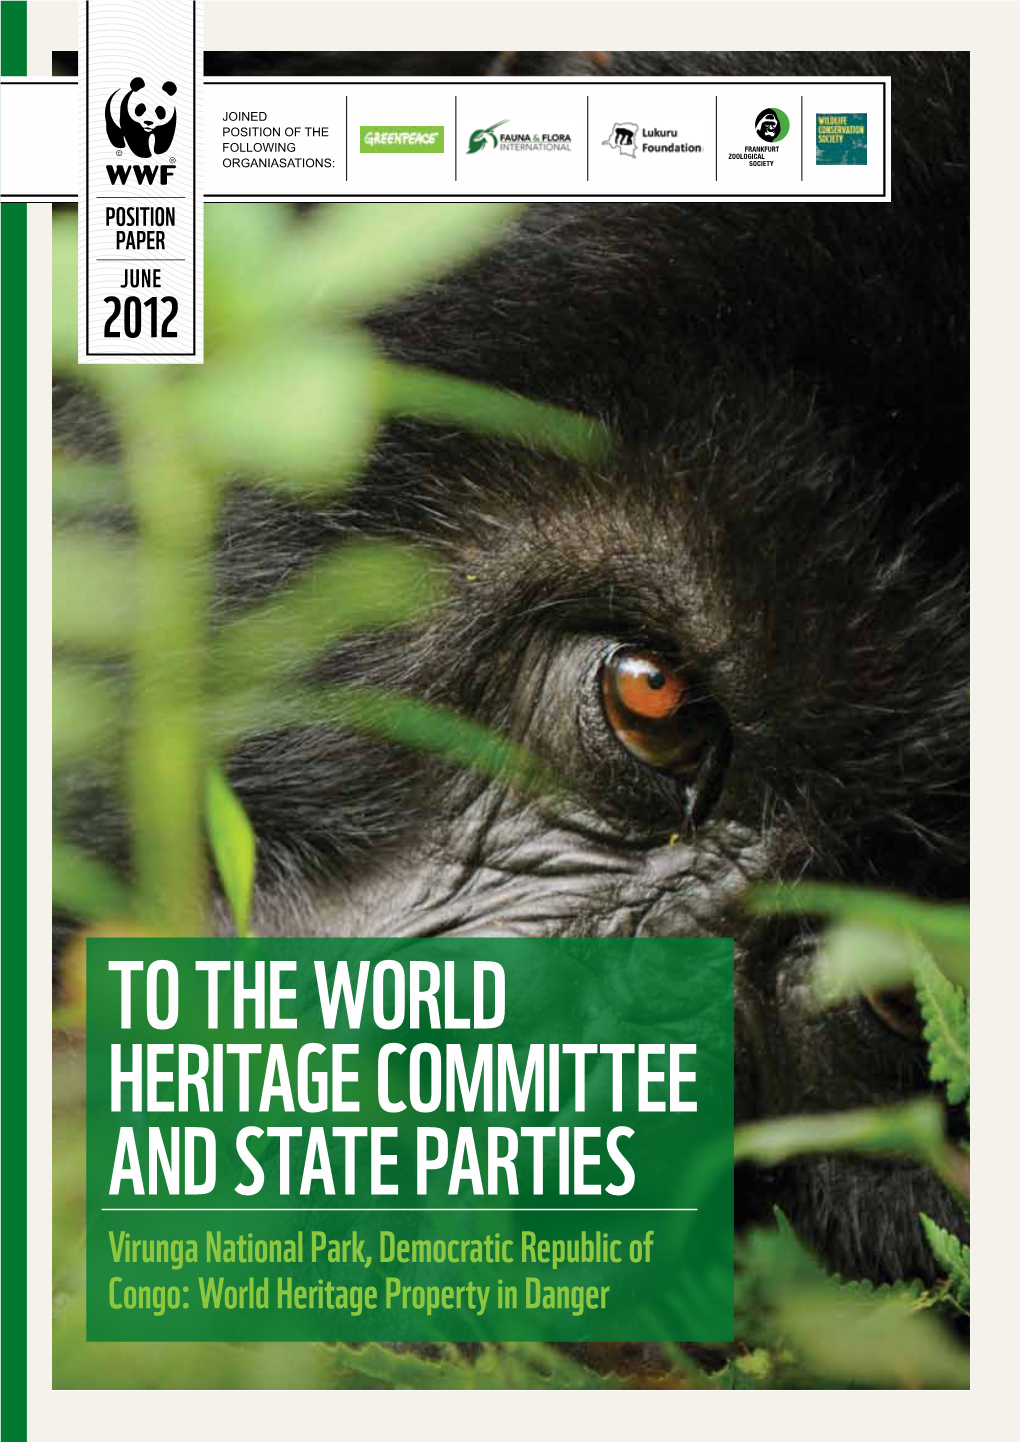 To the World Heritage Committee and State Parties Virunga National Park, Democratic Republic of Congo: World Heritage Property in Danger